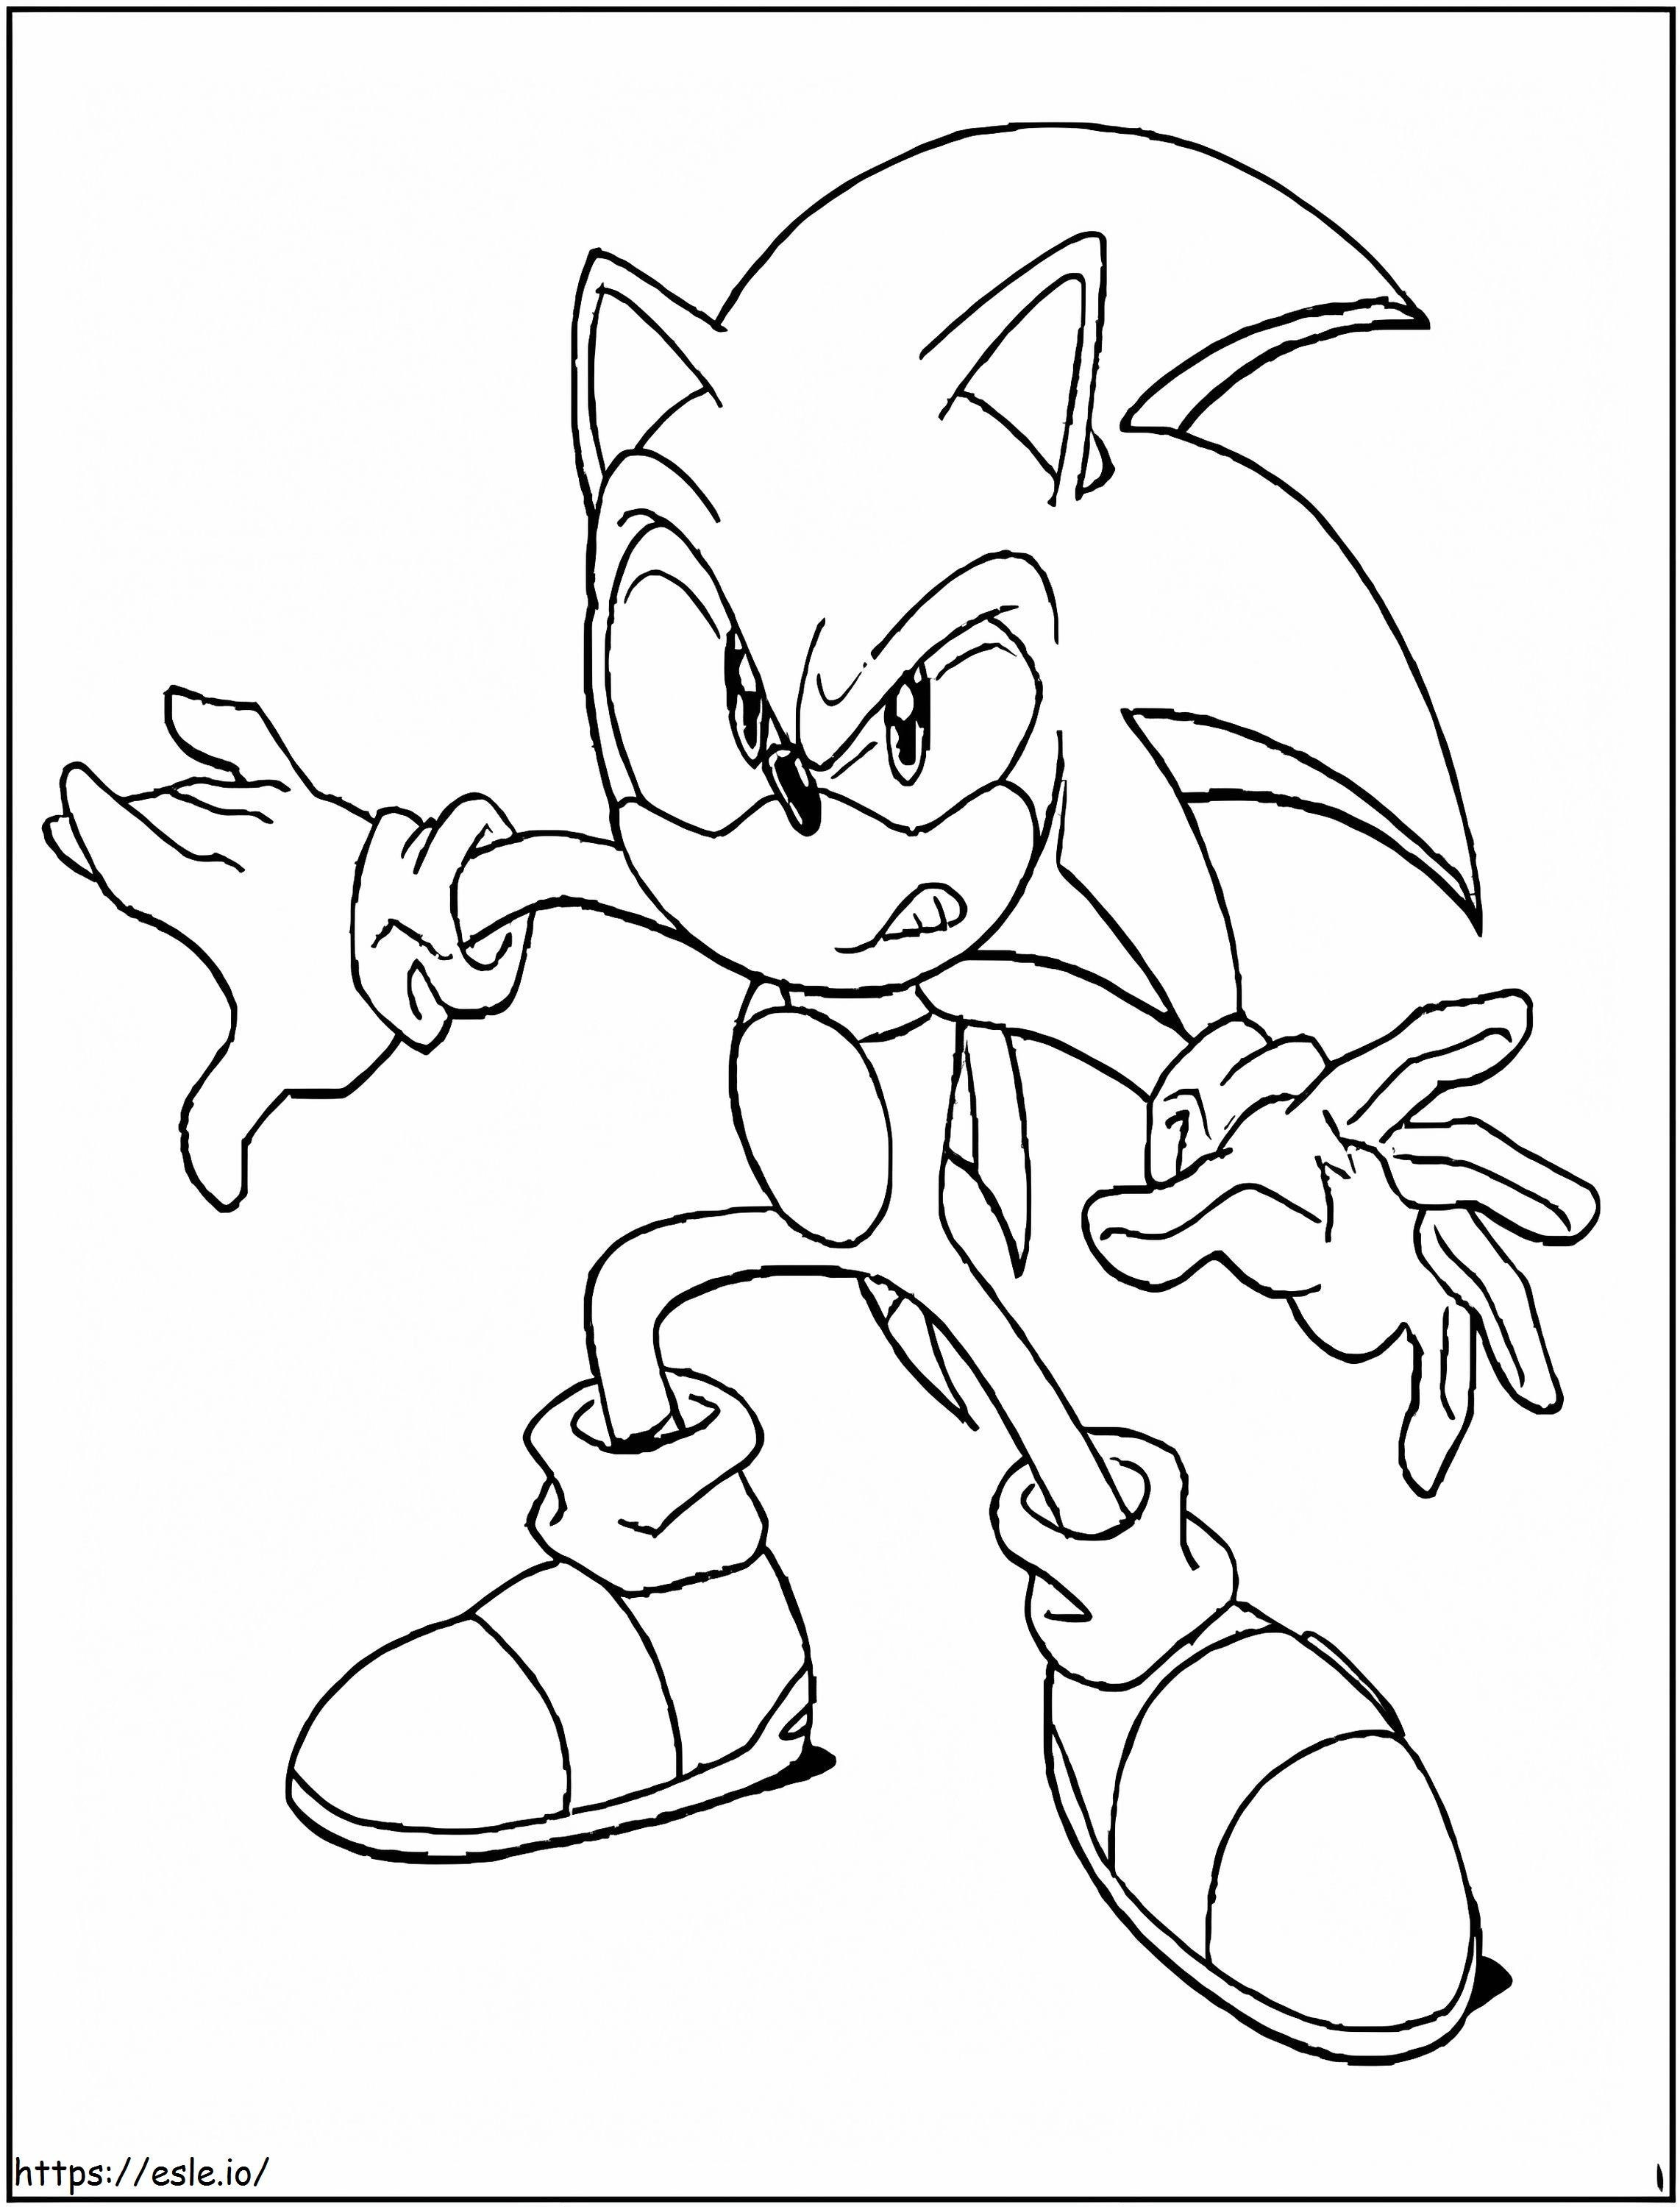 Sonic Action coloring page